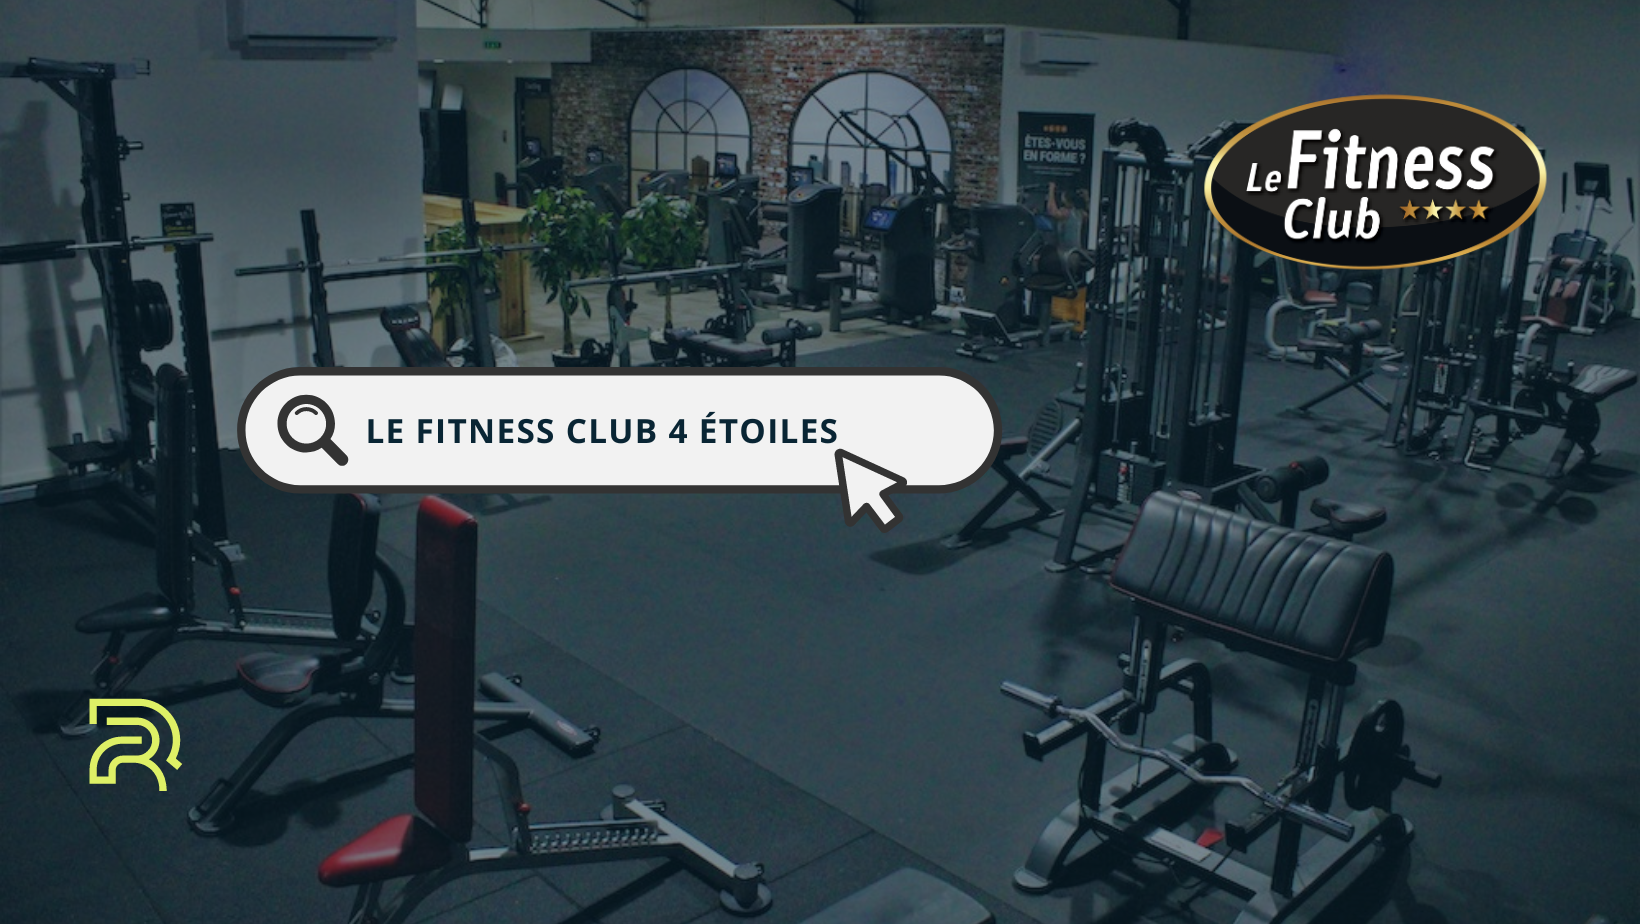 le fitness club 4 etoiles.png